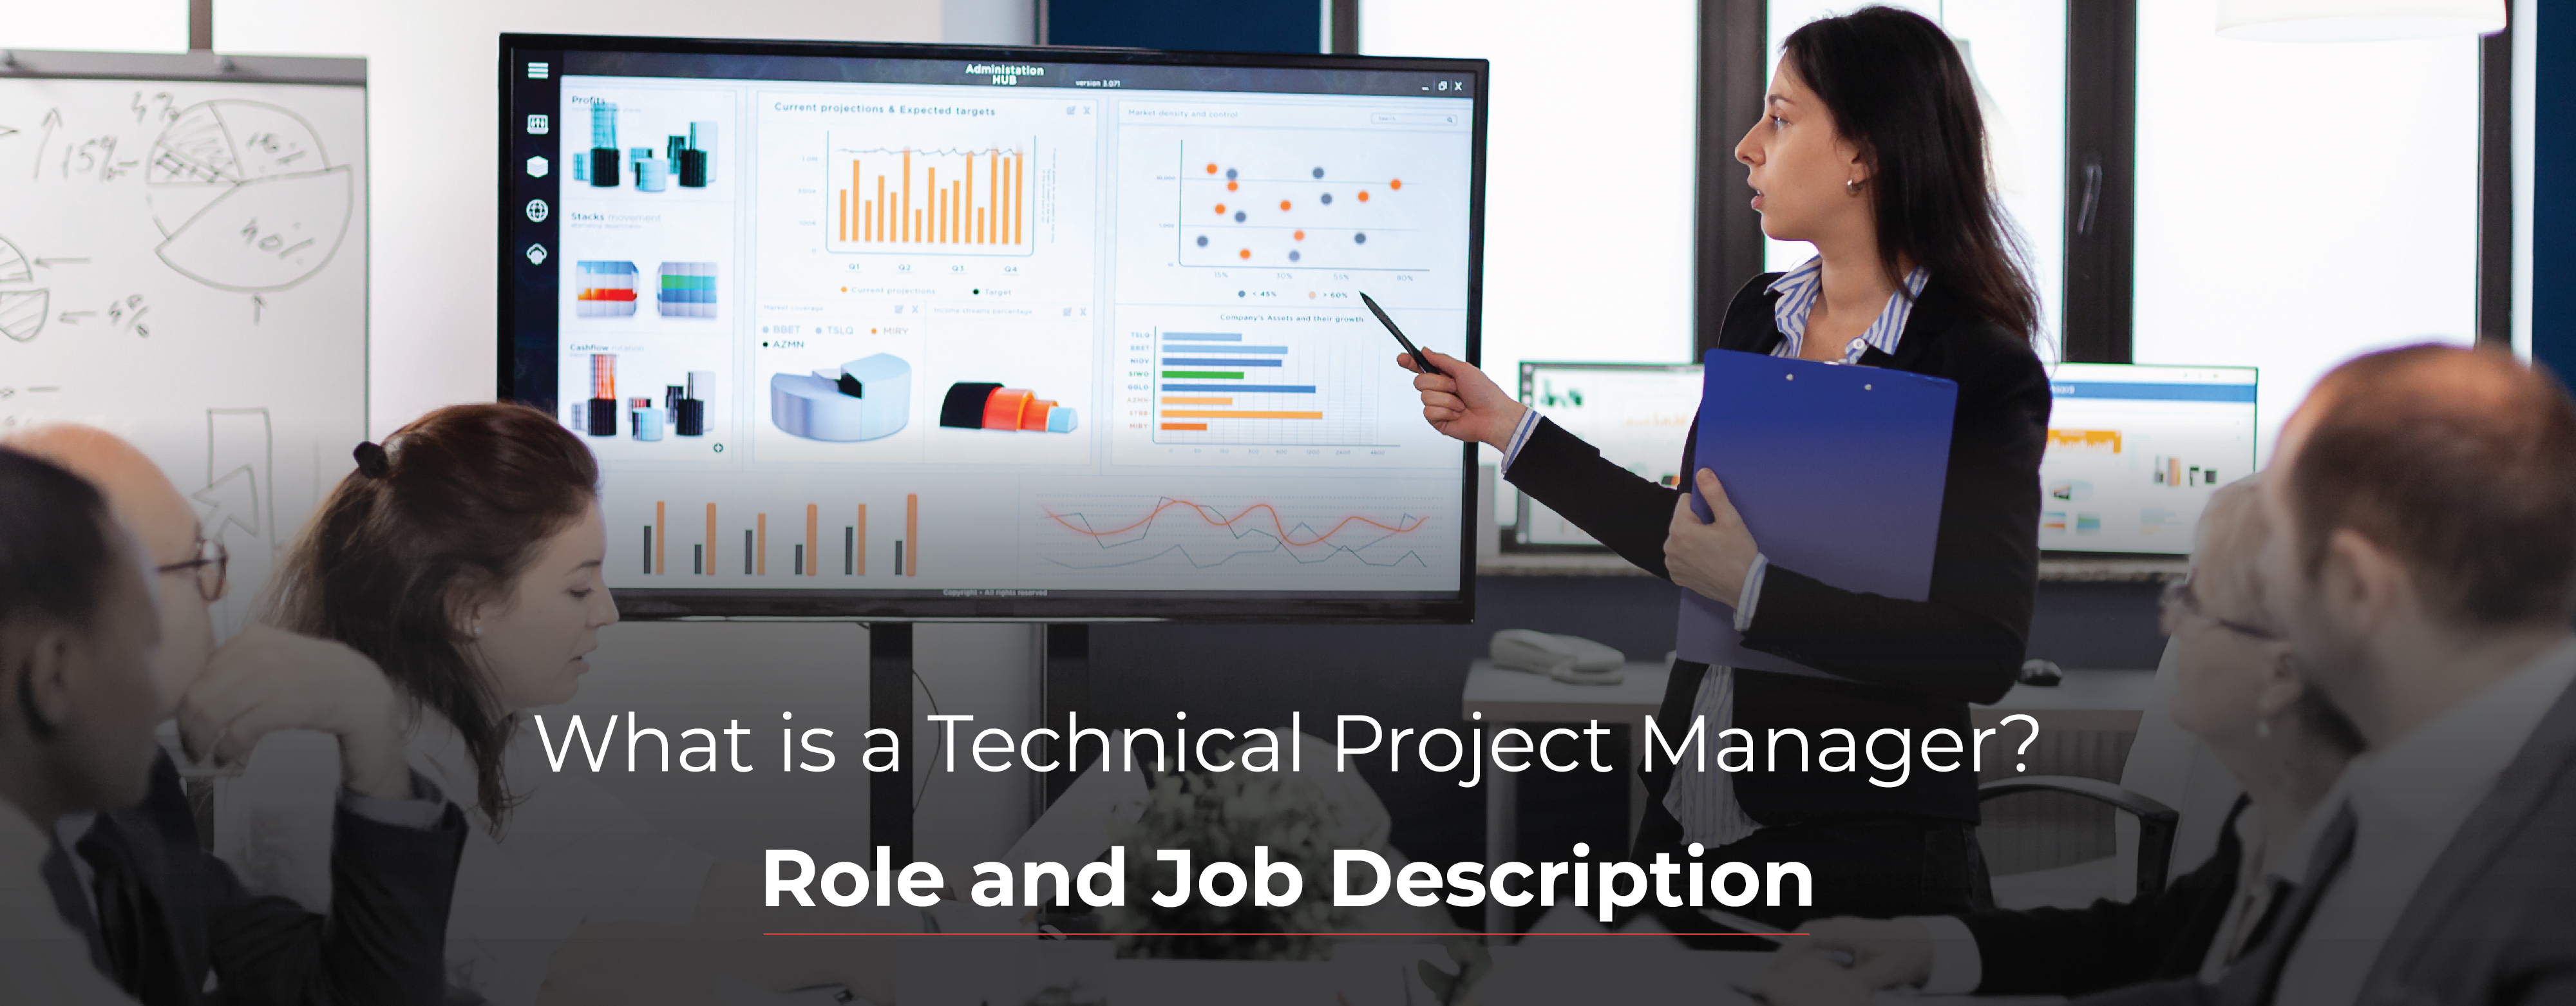 Technical Project Manager? Role